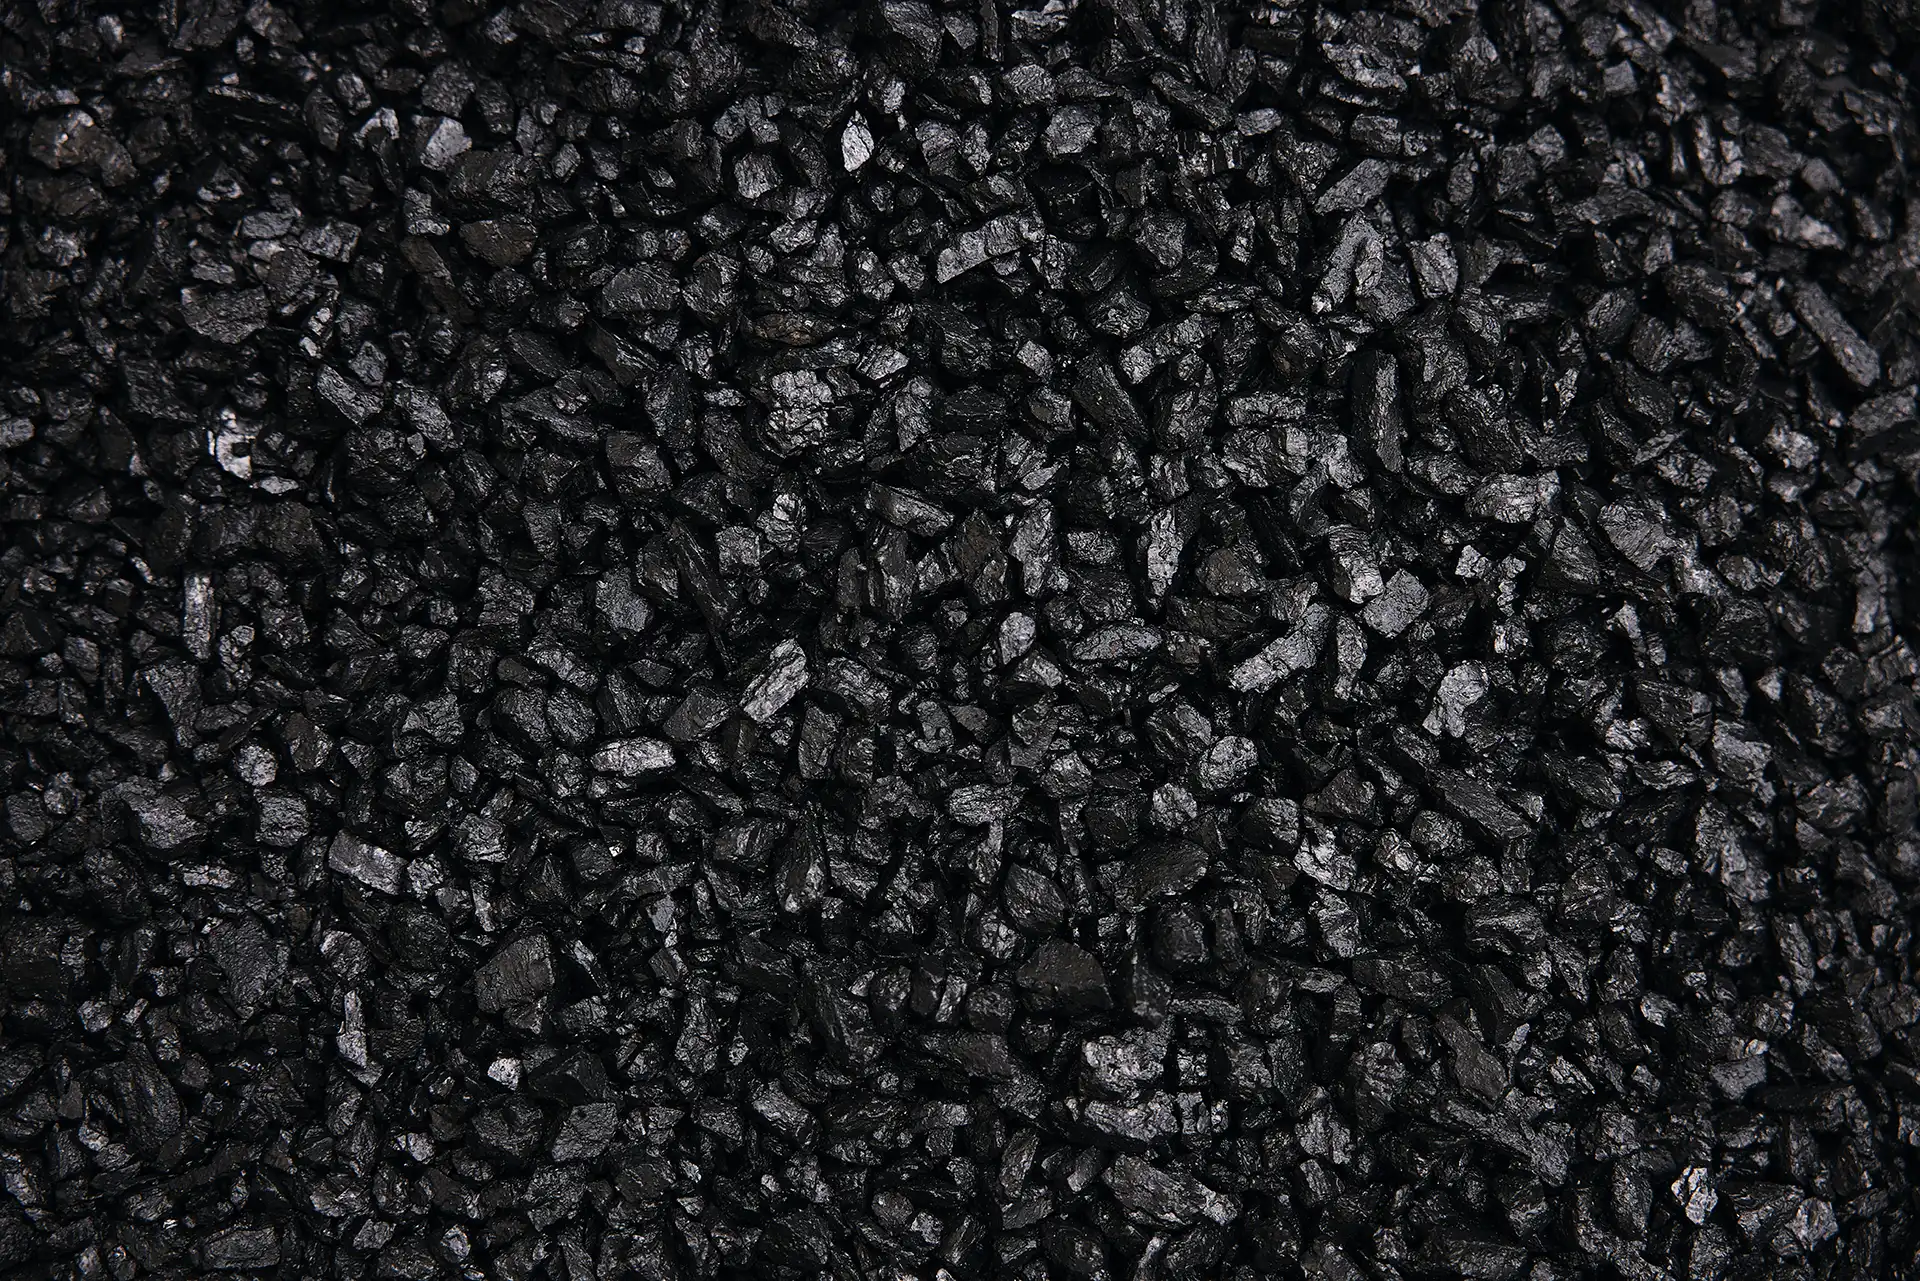 Understanding Carbon Black from Tires: Production, Properties, and Applications